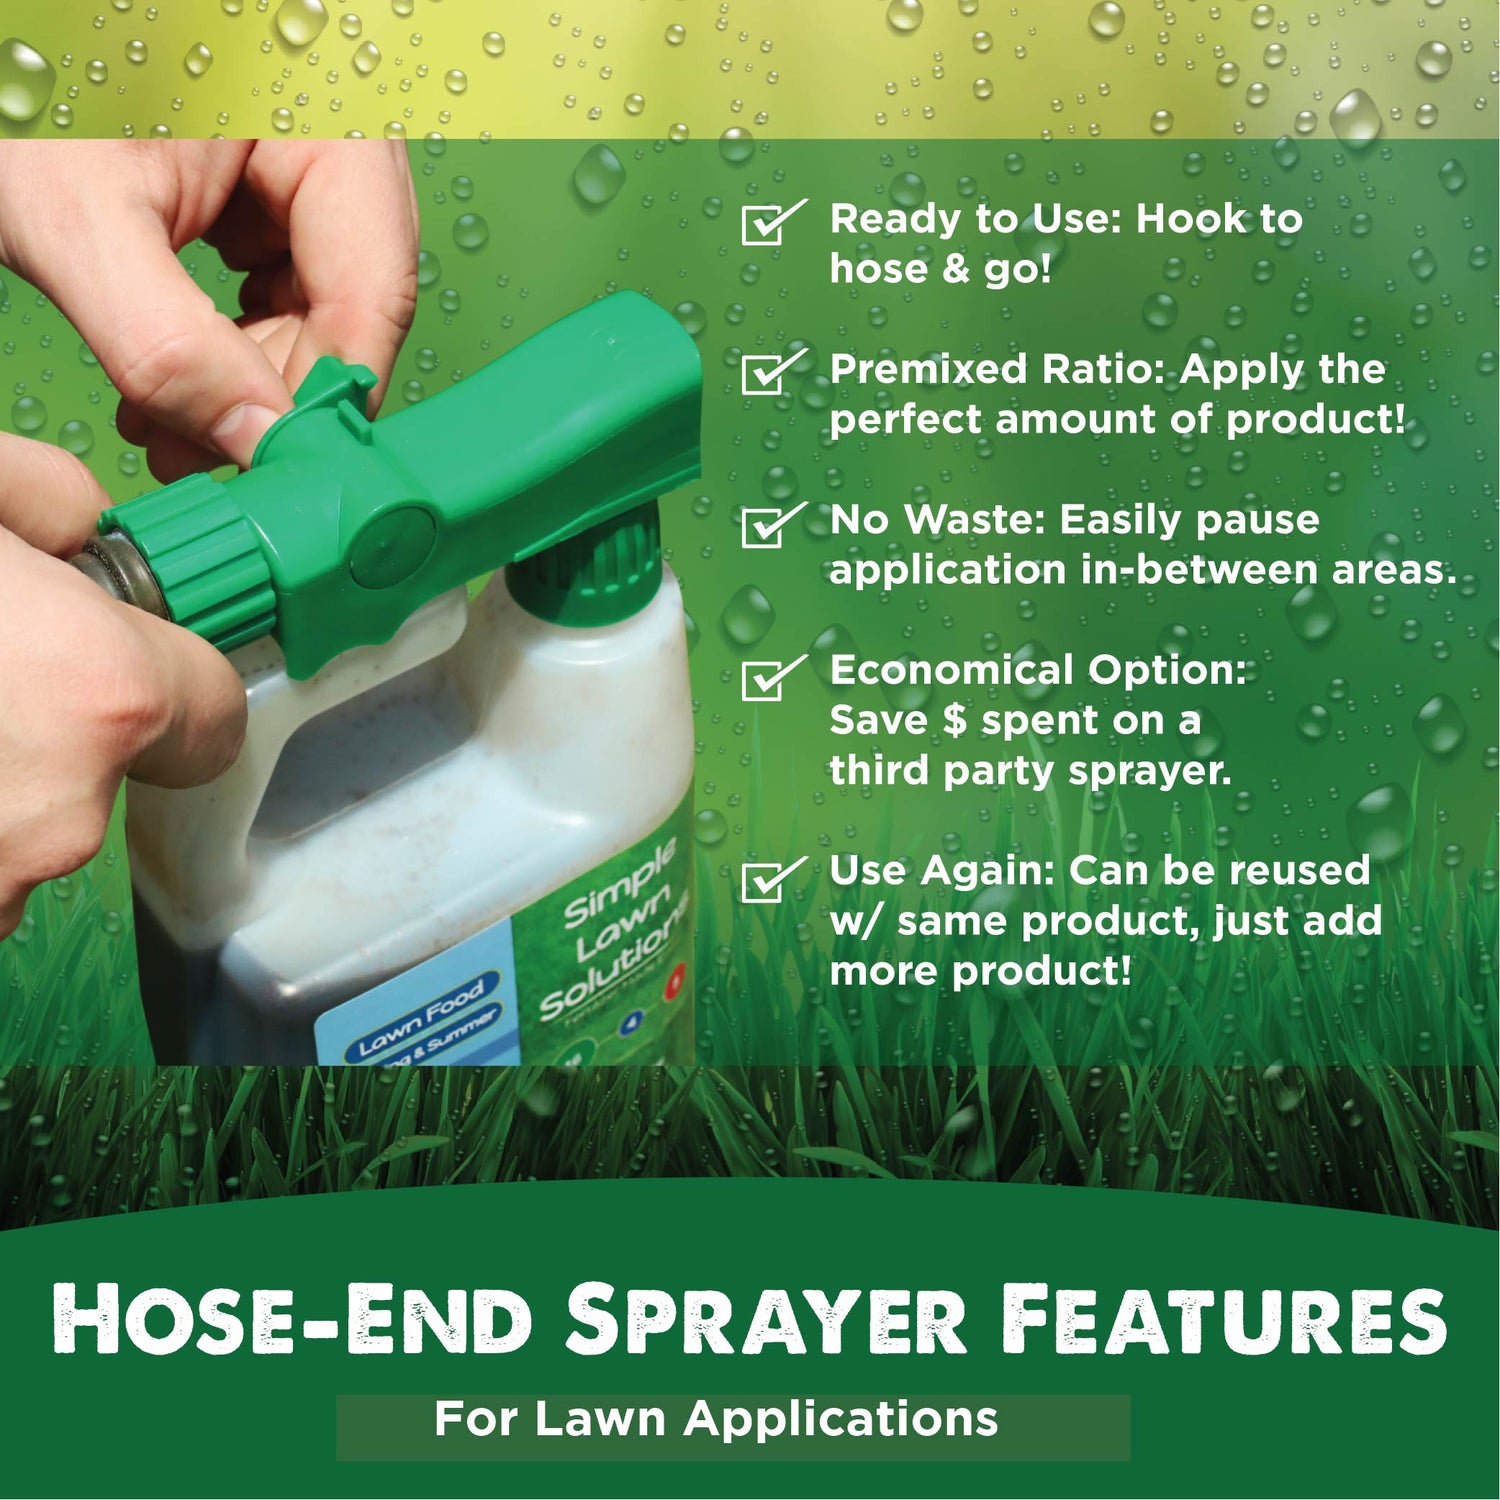 Hose-End Sprayer Features. Ready to Use: Hook to hose and go! Premixed Ratio: Apply the perfect amount of product! No Waste: Easily pause application in-between areas. Economical Option: Save $ spent on a third party sprayer. Use Again: Can be reused with same product, just add more product!